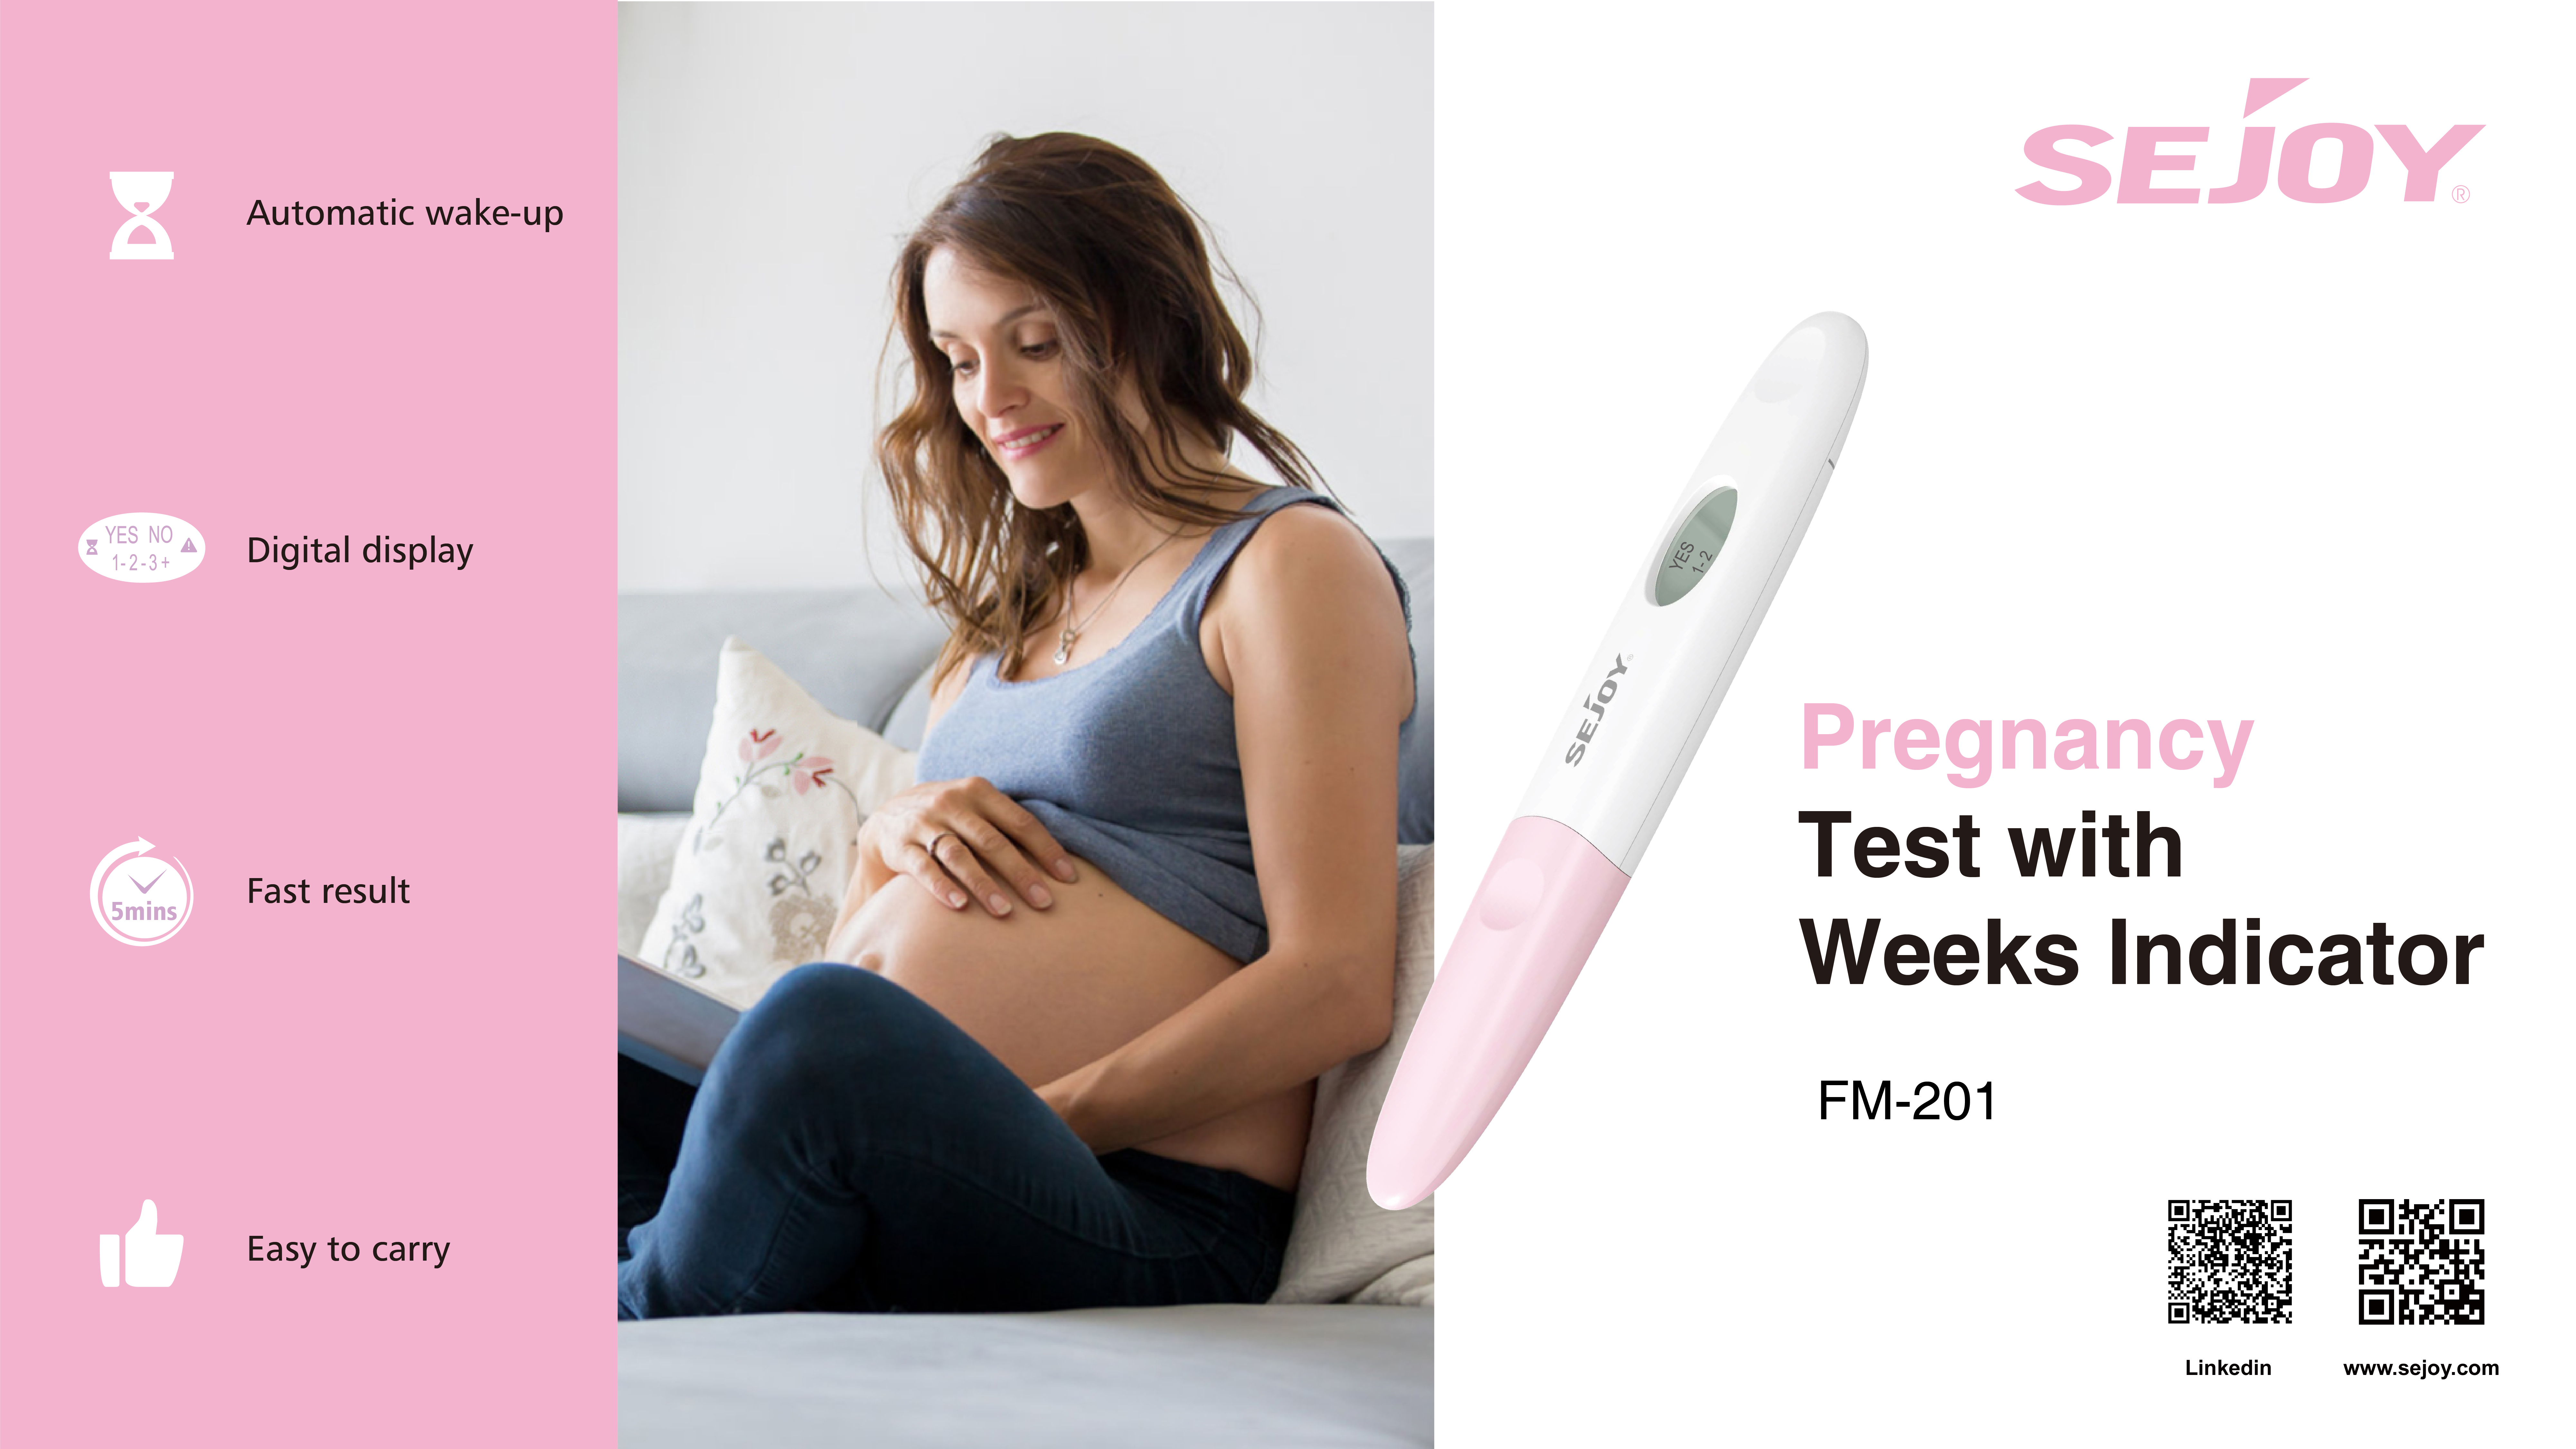 Pregnancy Test with Weeks Indicator